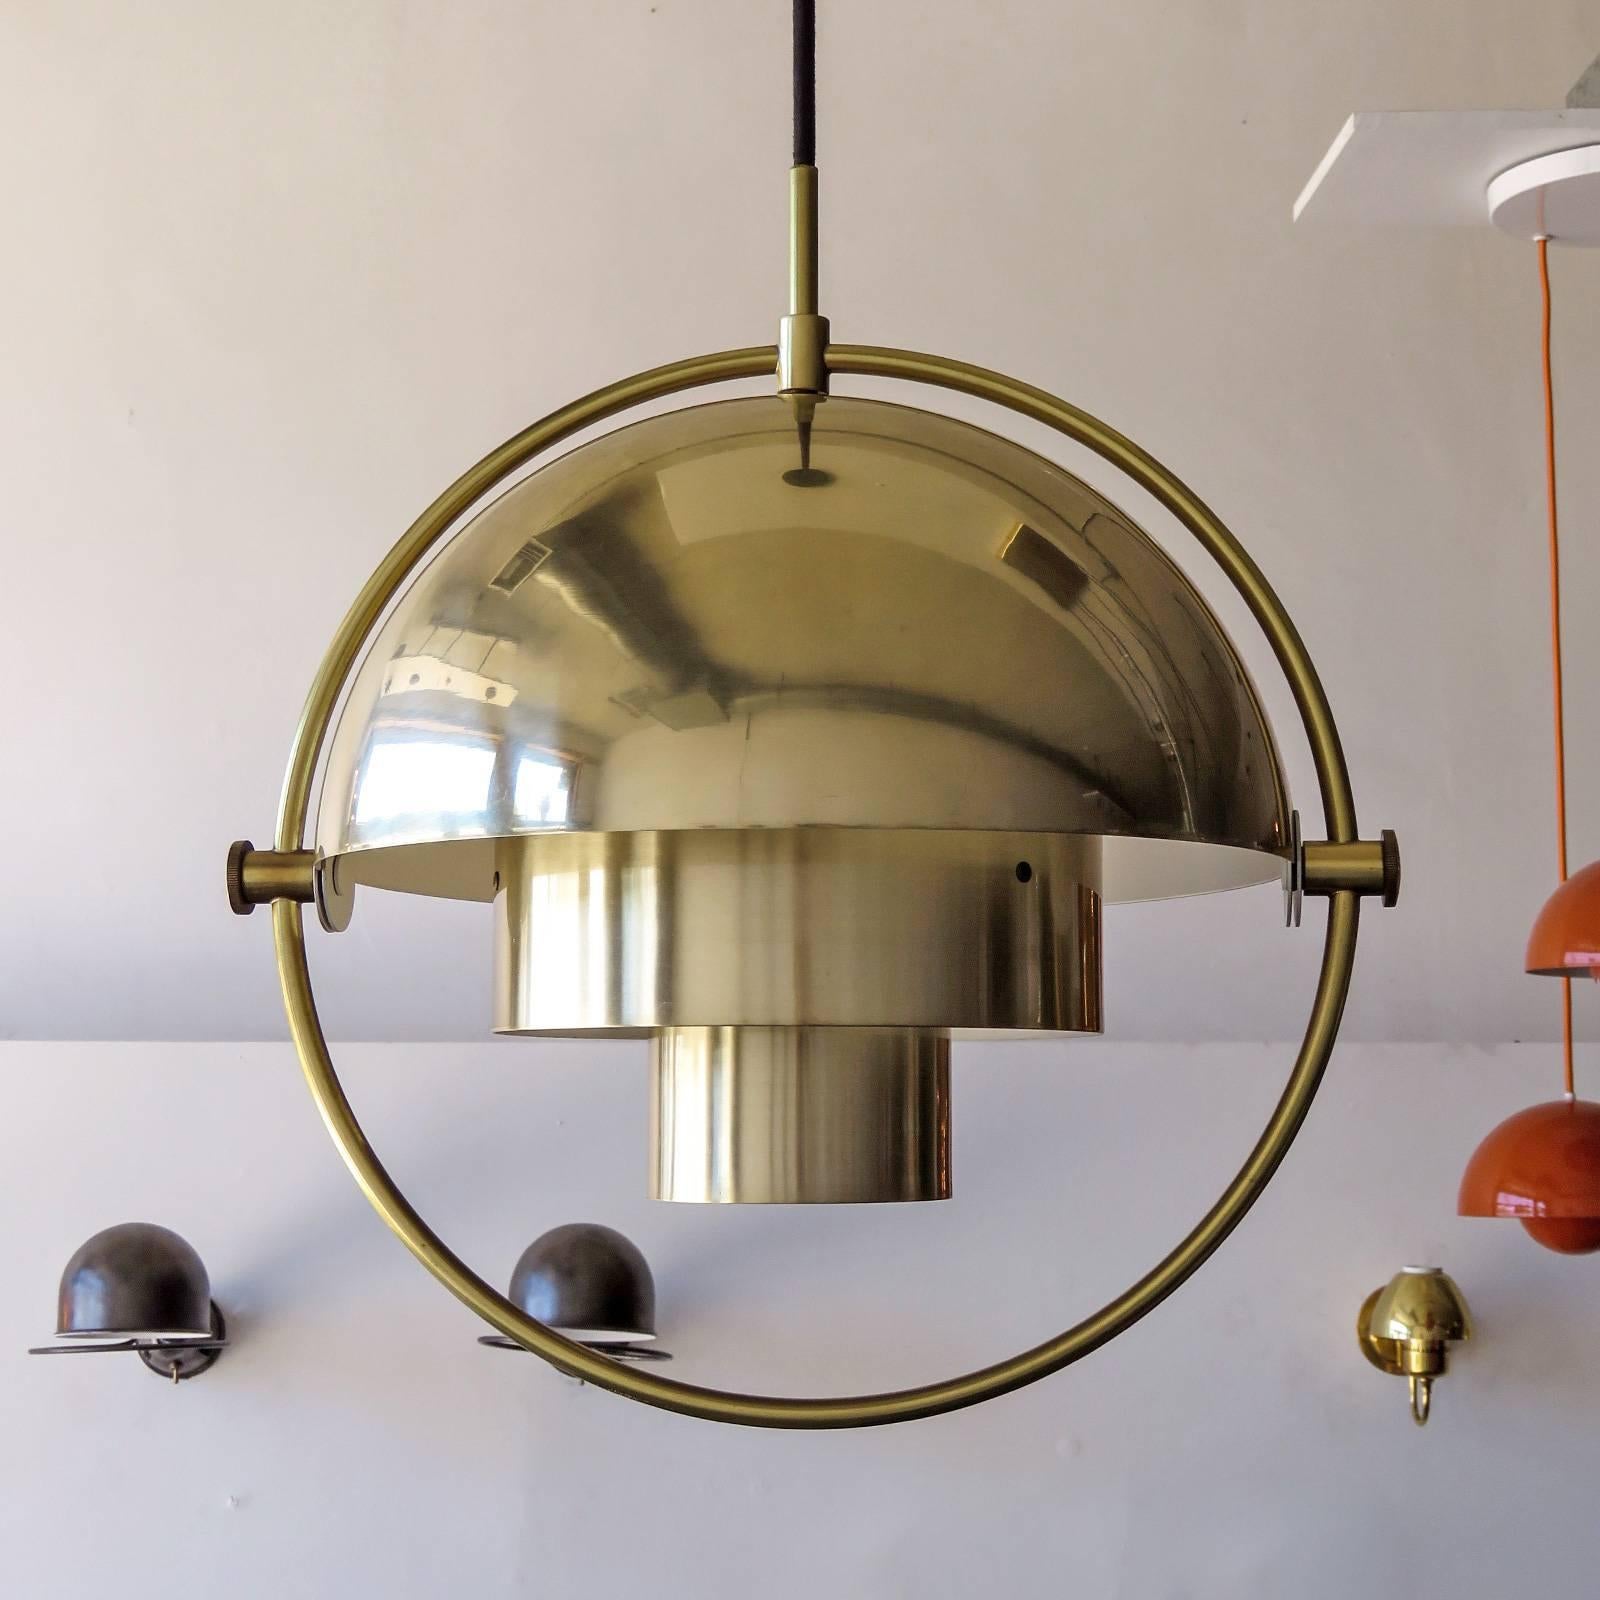 Elegant brass multi-lite pendant by Louis Weisdorf for Lyfa, Denmark, 1972, can be adjusted to a multitude of configurations.